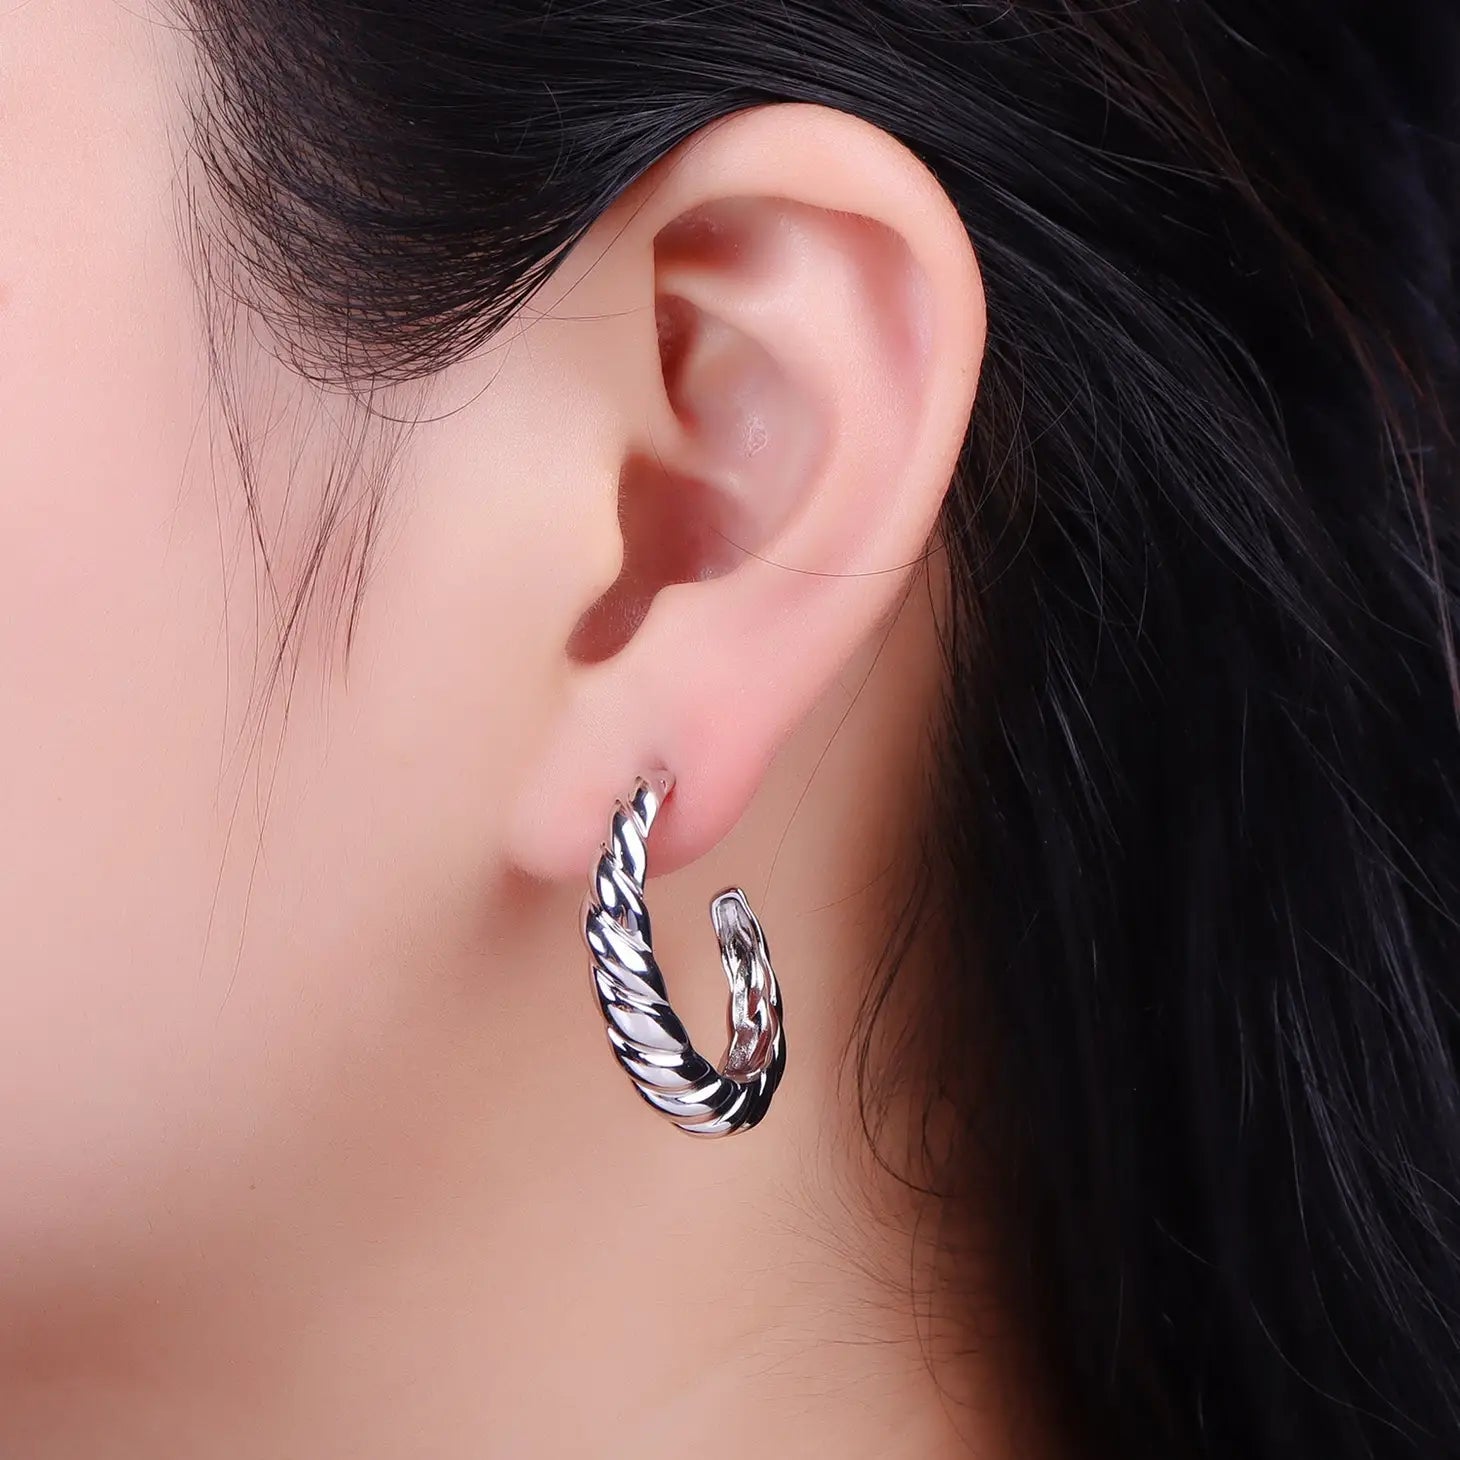 Women' Business Twisted Hoop Earrings - Silver NORA GARDNER | OFFICIAL STORE for work and office